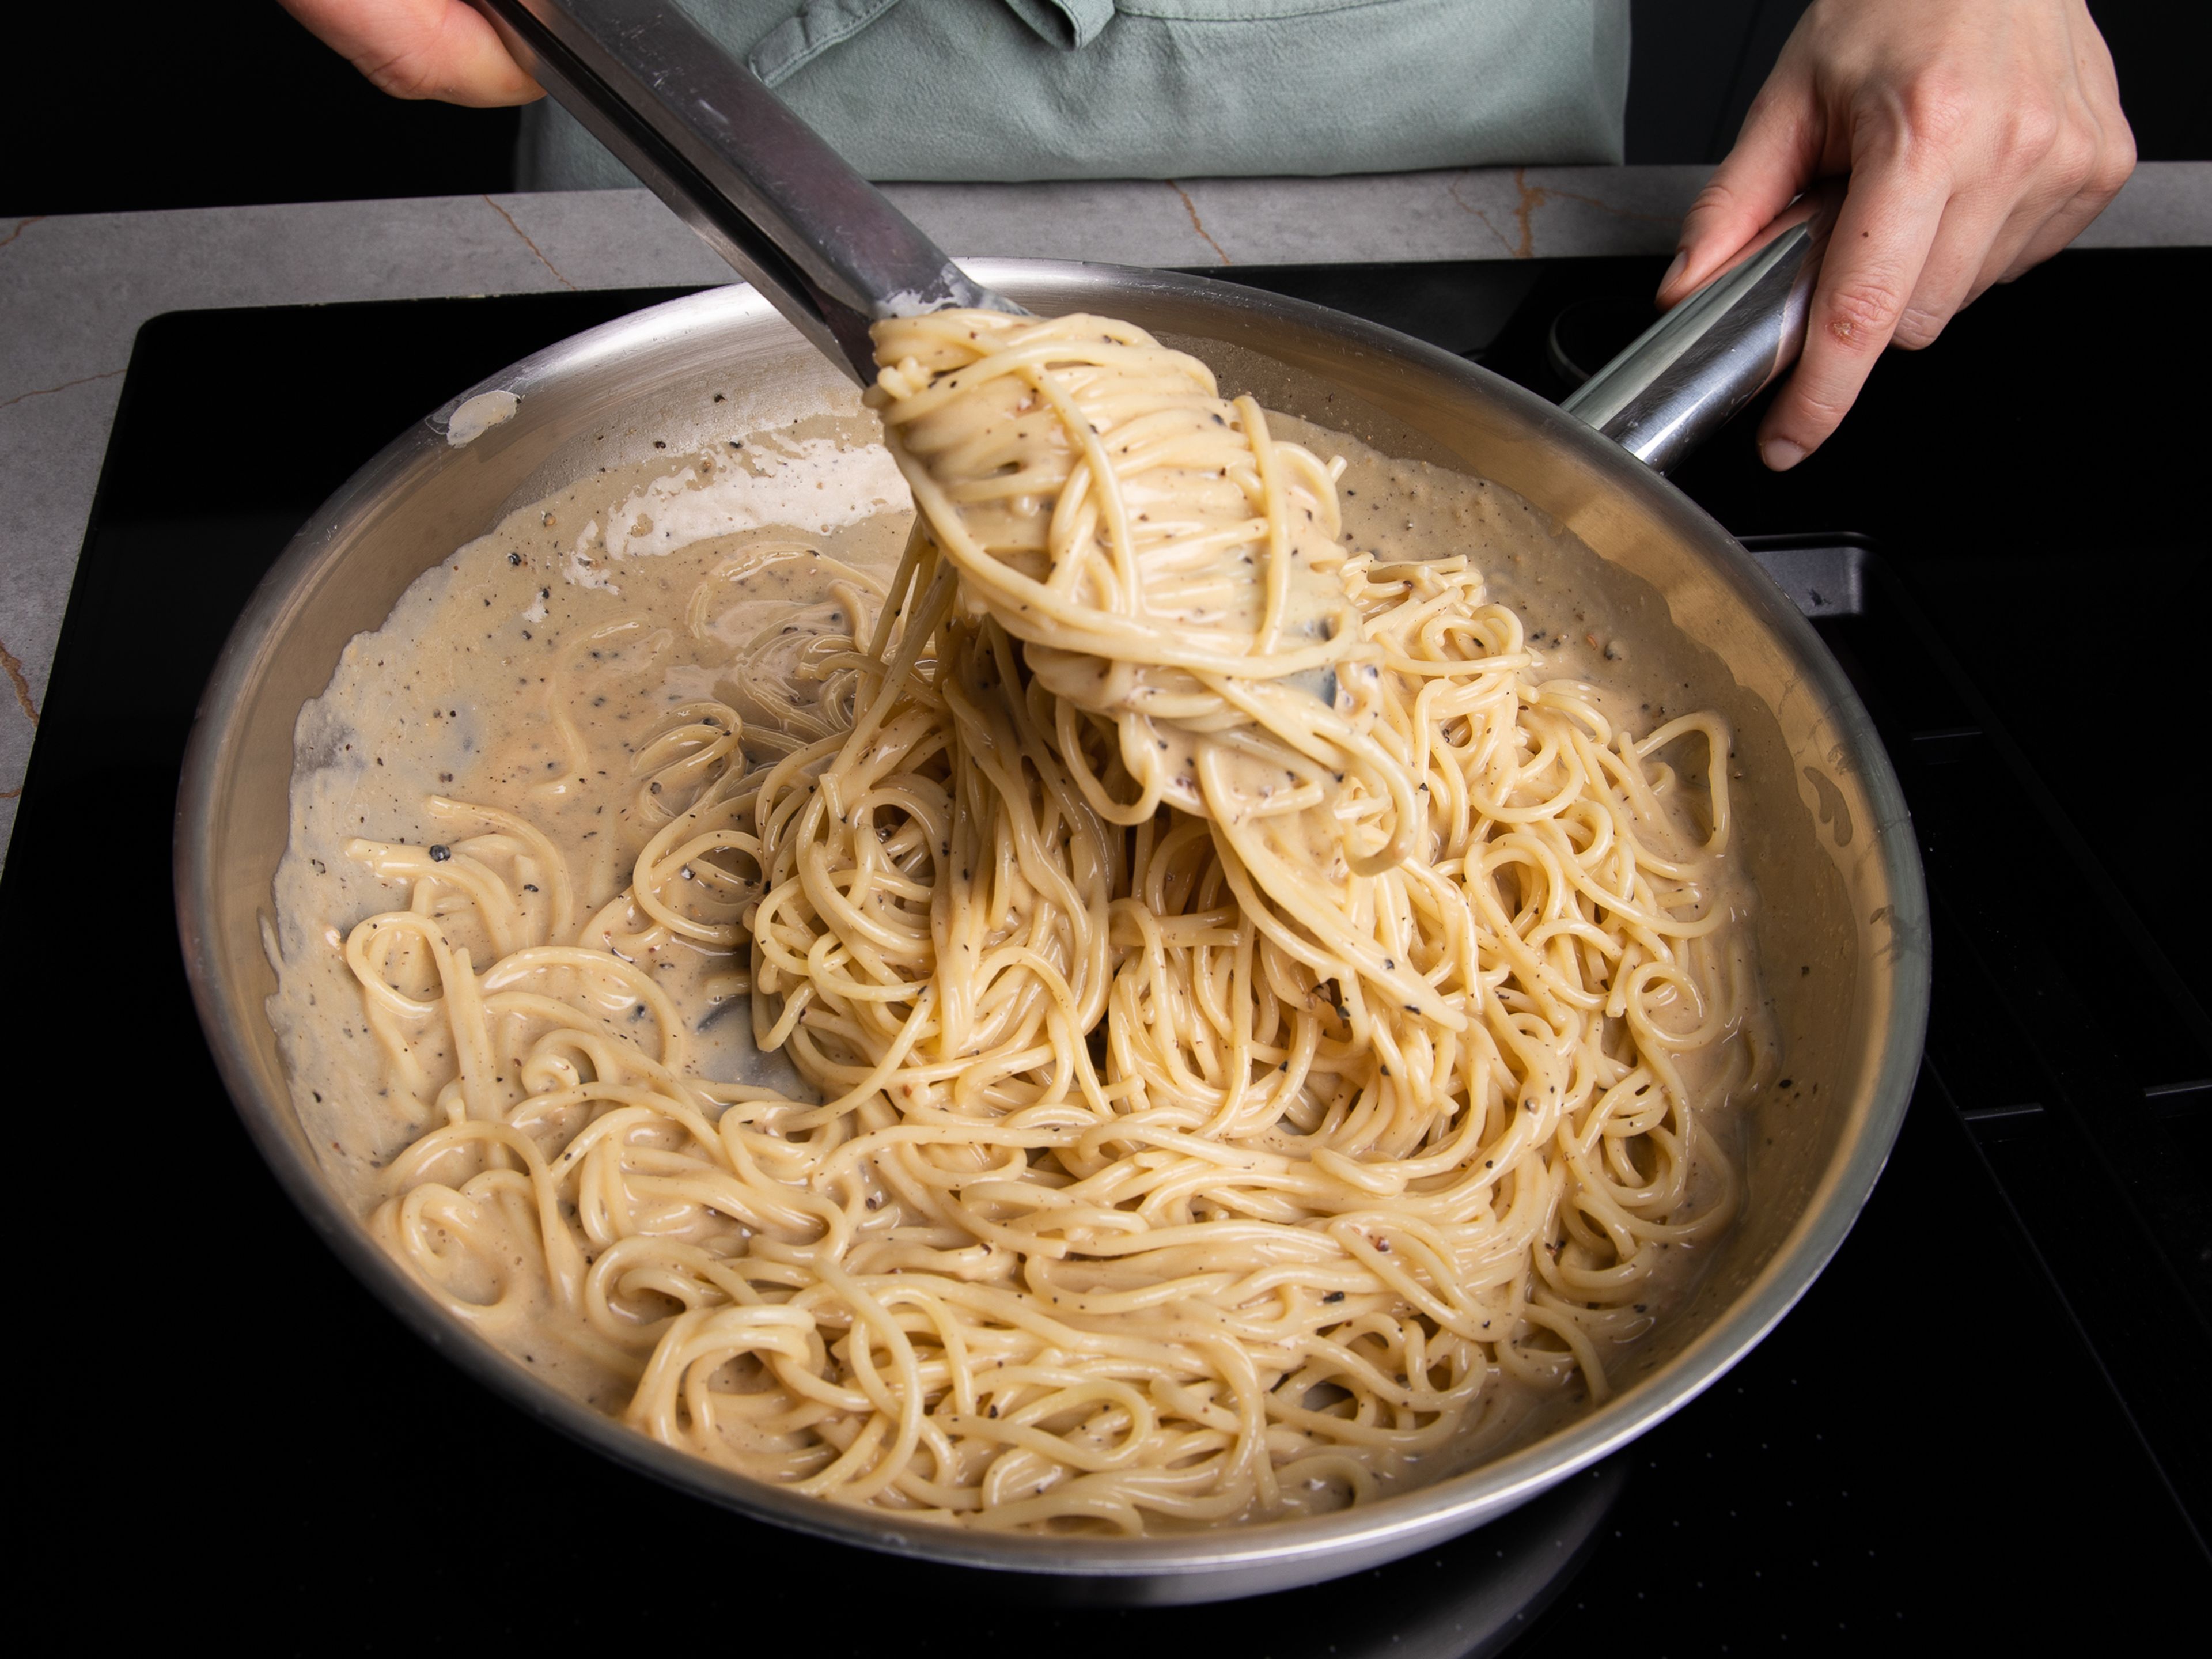 Turn off the heat, add drained pasta and mix fast until the sauce is creamy and glossy. If necessary, add a spoonful of pasta water. Serve with the remaining crushed black pepper and drizzle with a little more olive oil if desired.